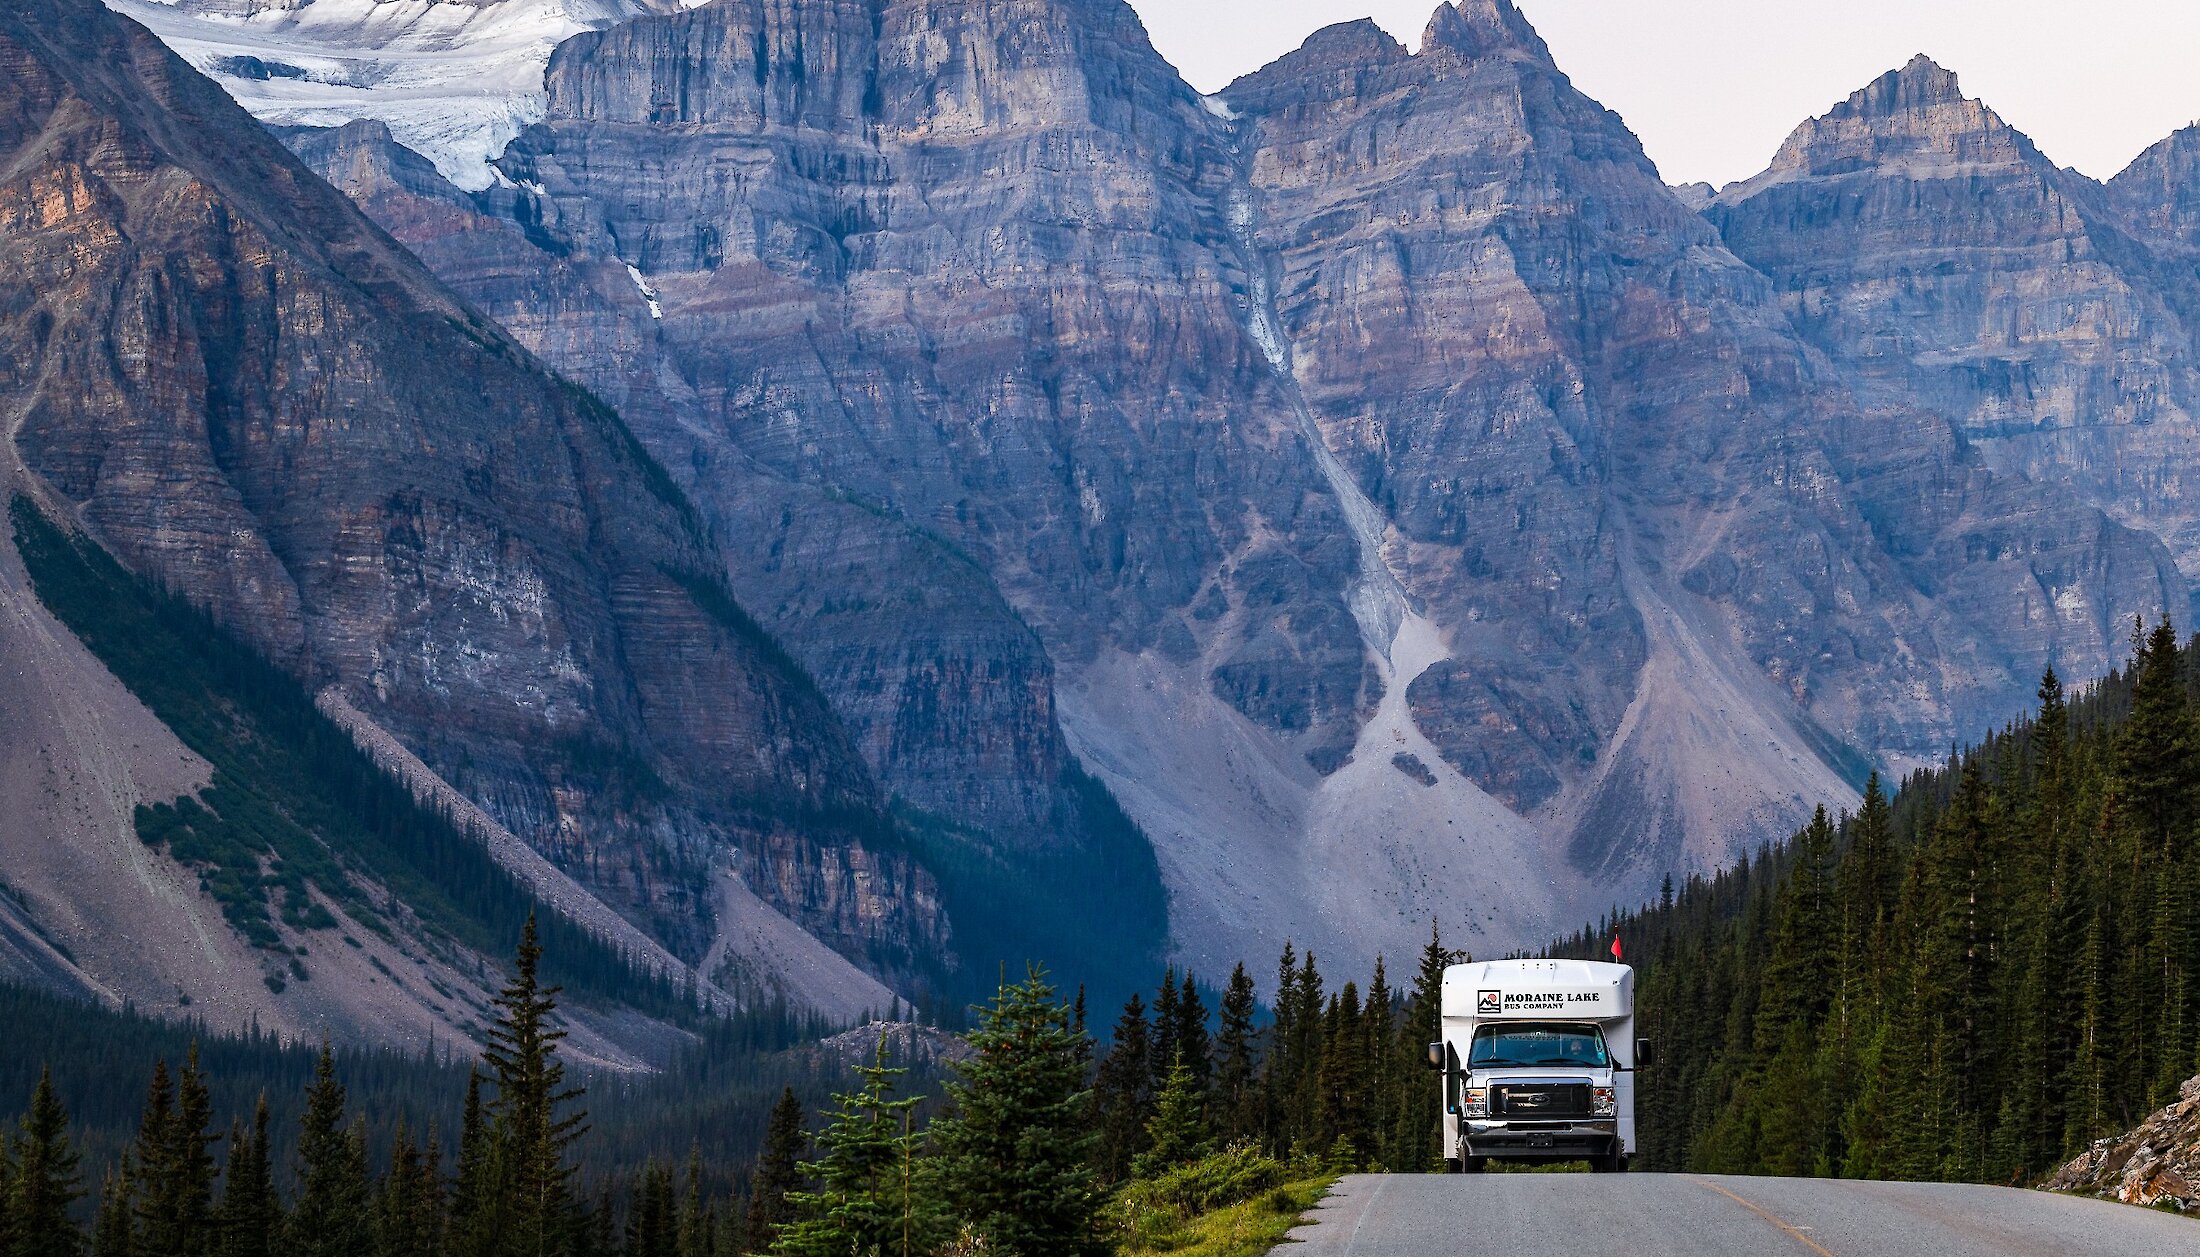 A shuttle driving Moraine Lake bus road with the Valley of 10 peaks in the background